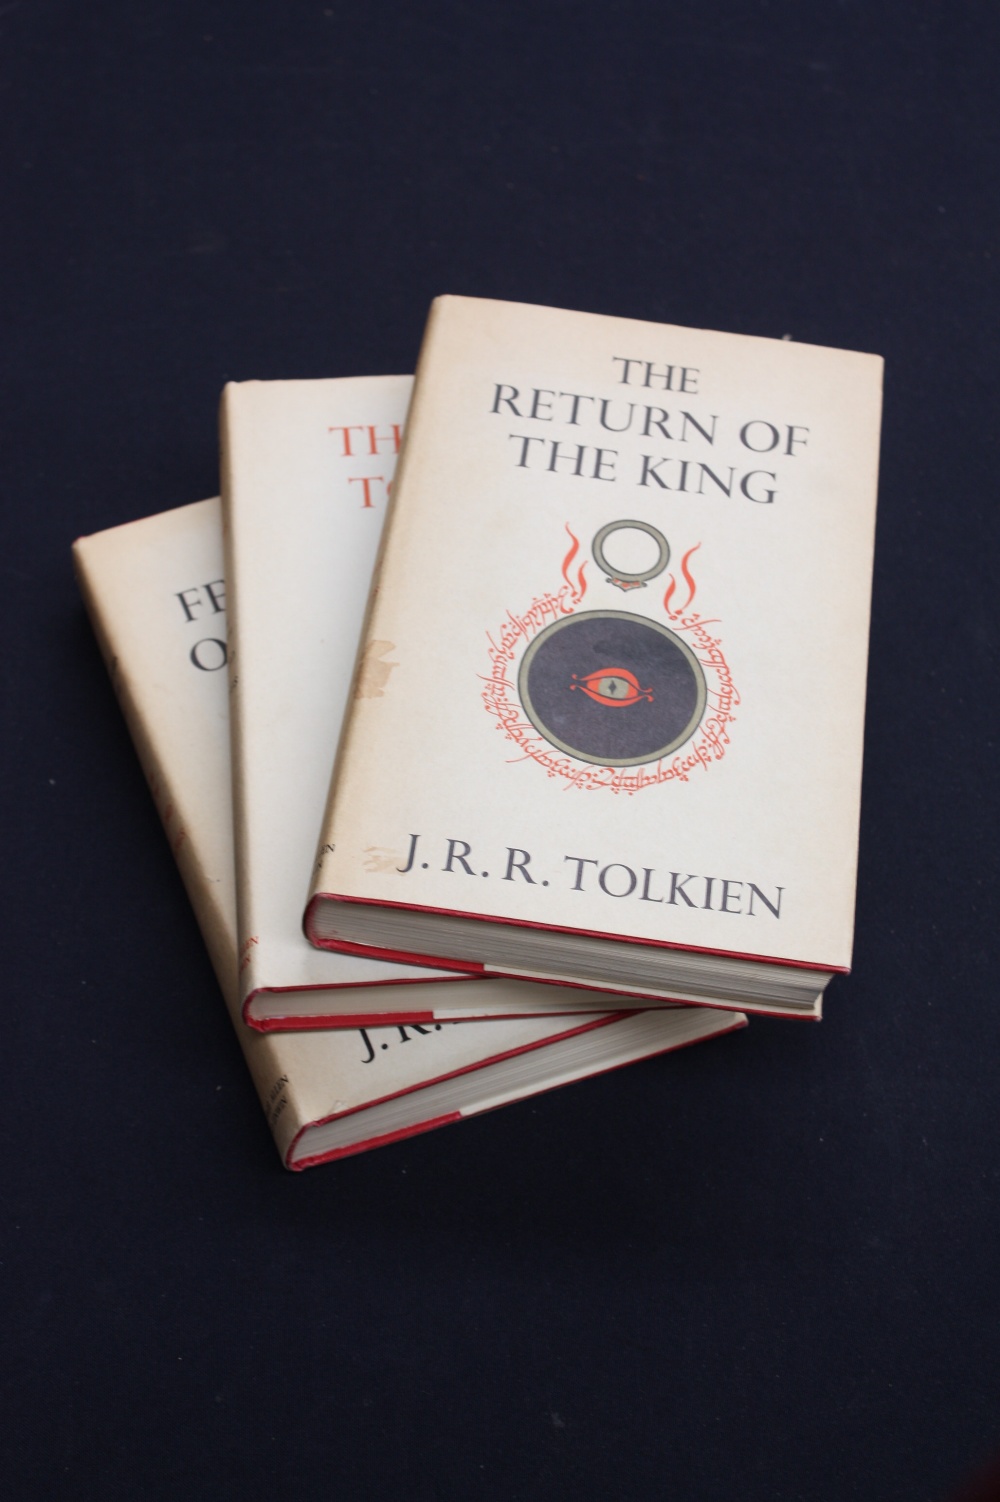 J.R.R. Tolkien Lord of the Rings Trilogy, Fellowship of the Ring 14th Impression 1965, Return of the